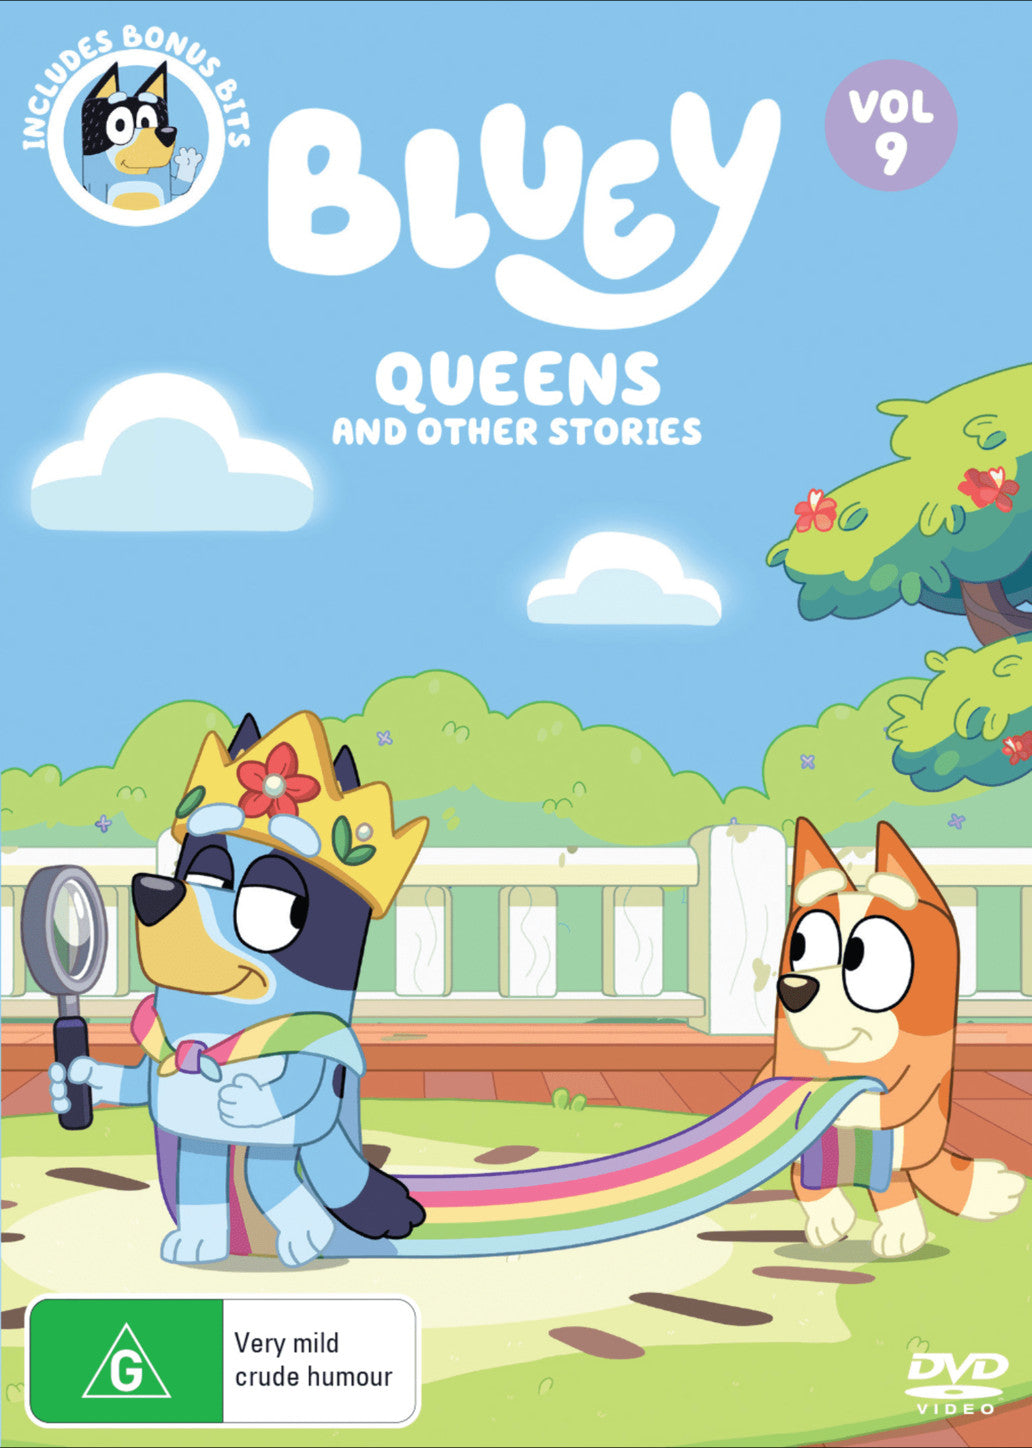 BLUEY: QUEENS AND OTHER STORIES (VOL 9)